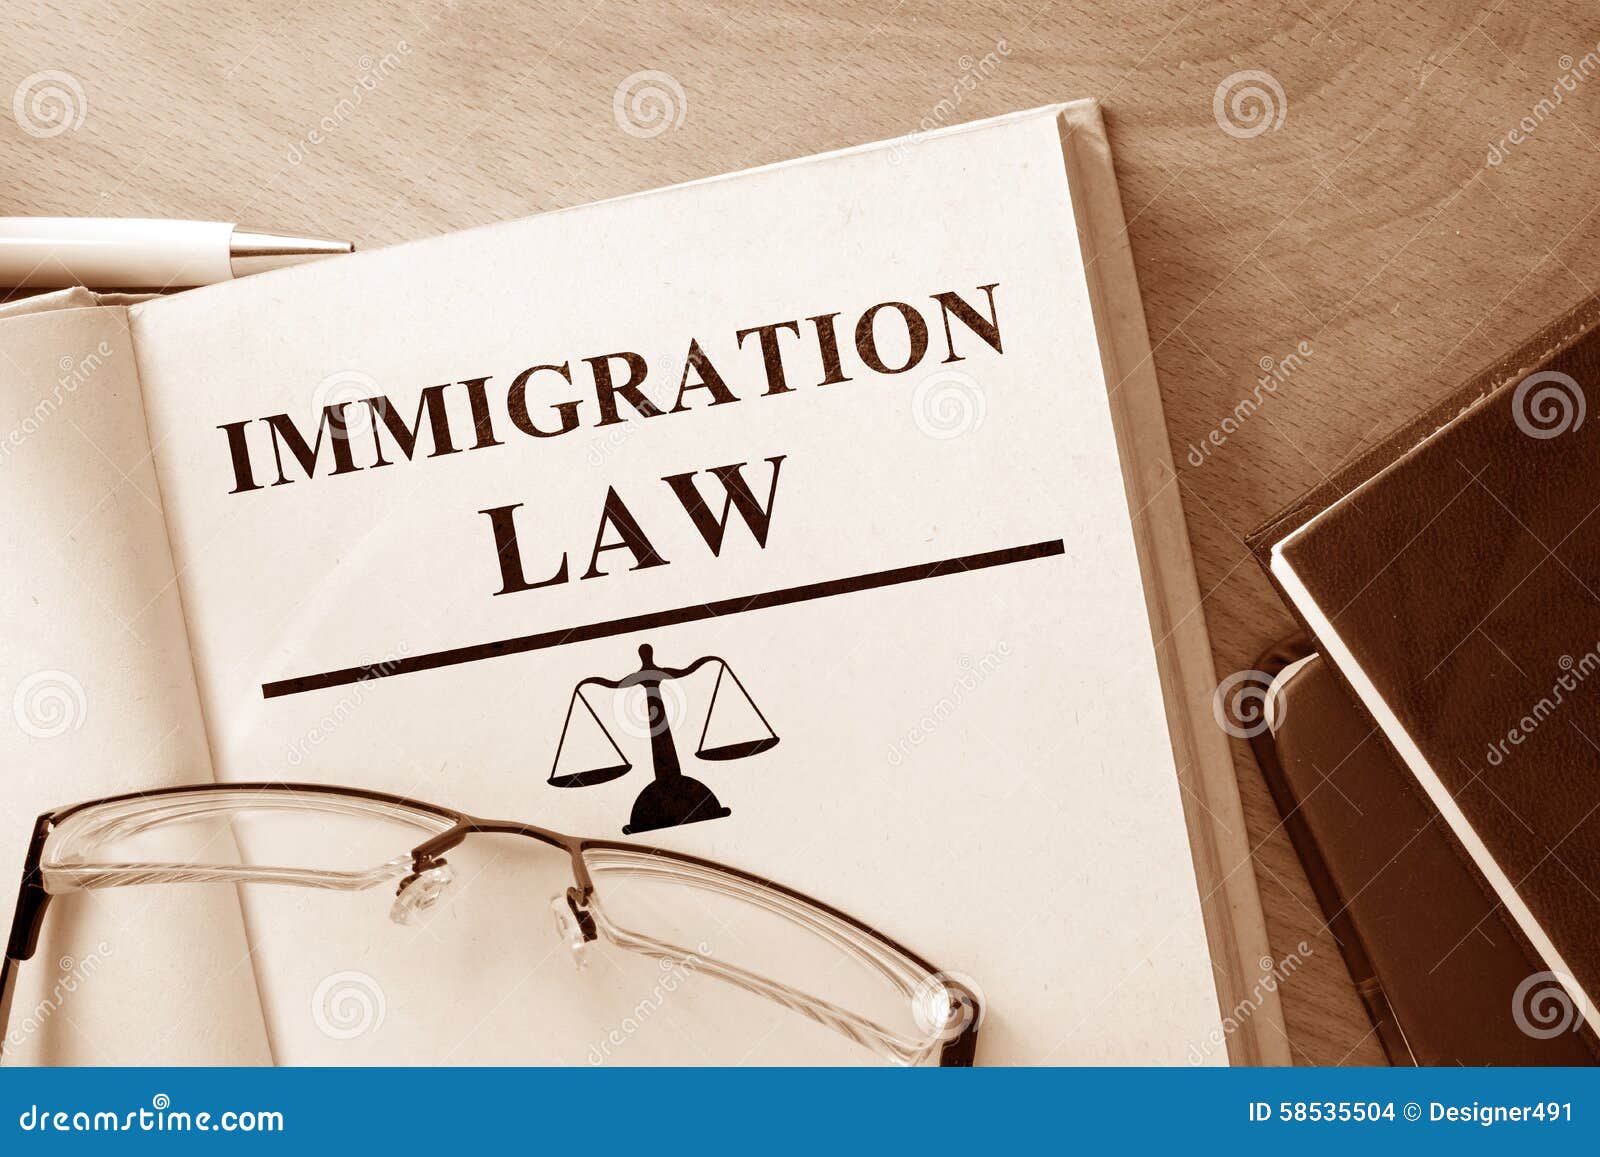 book with words immigration law.